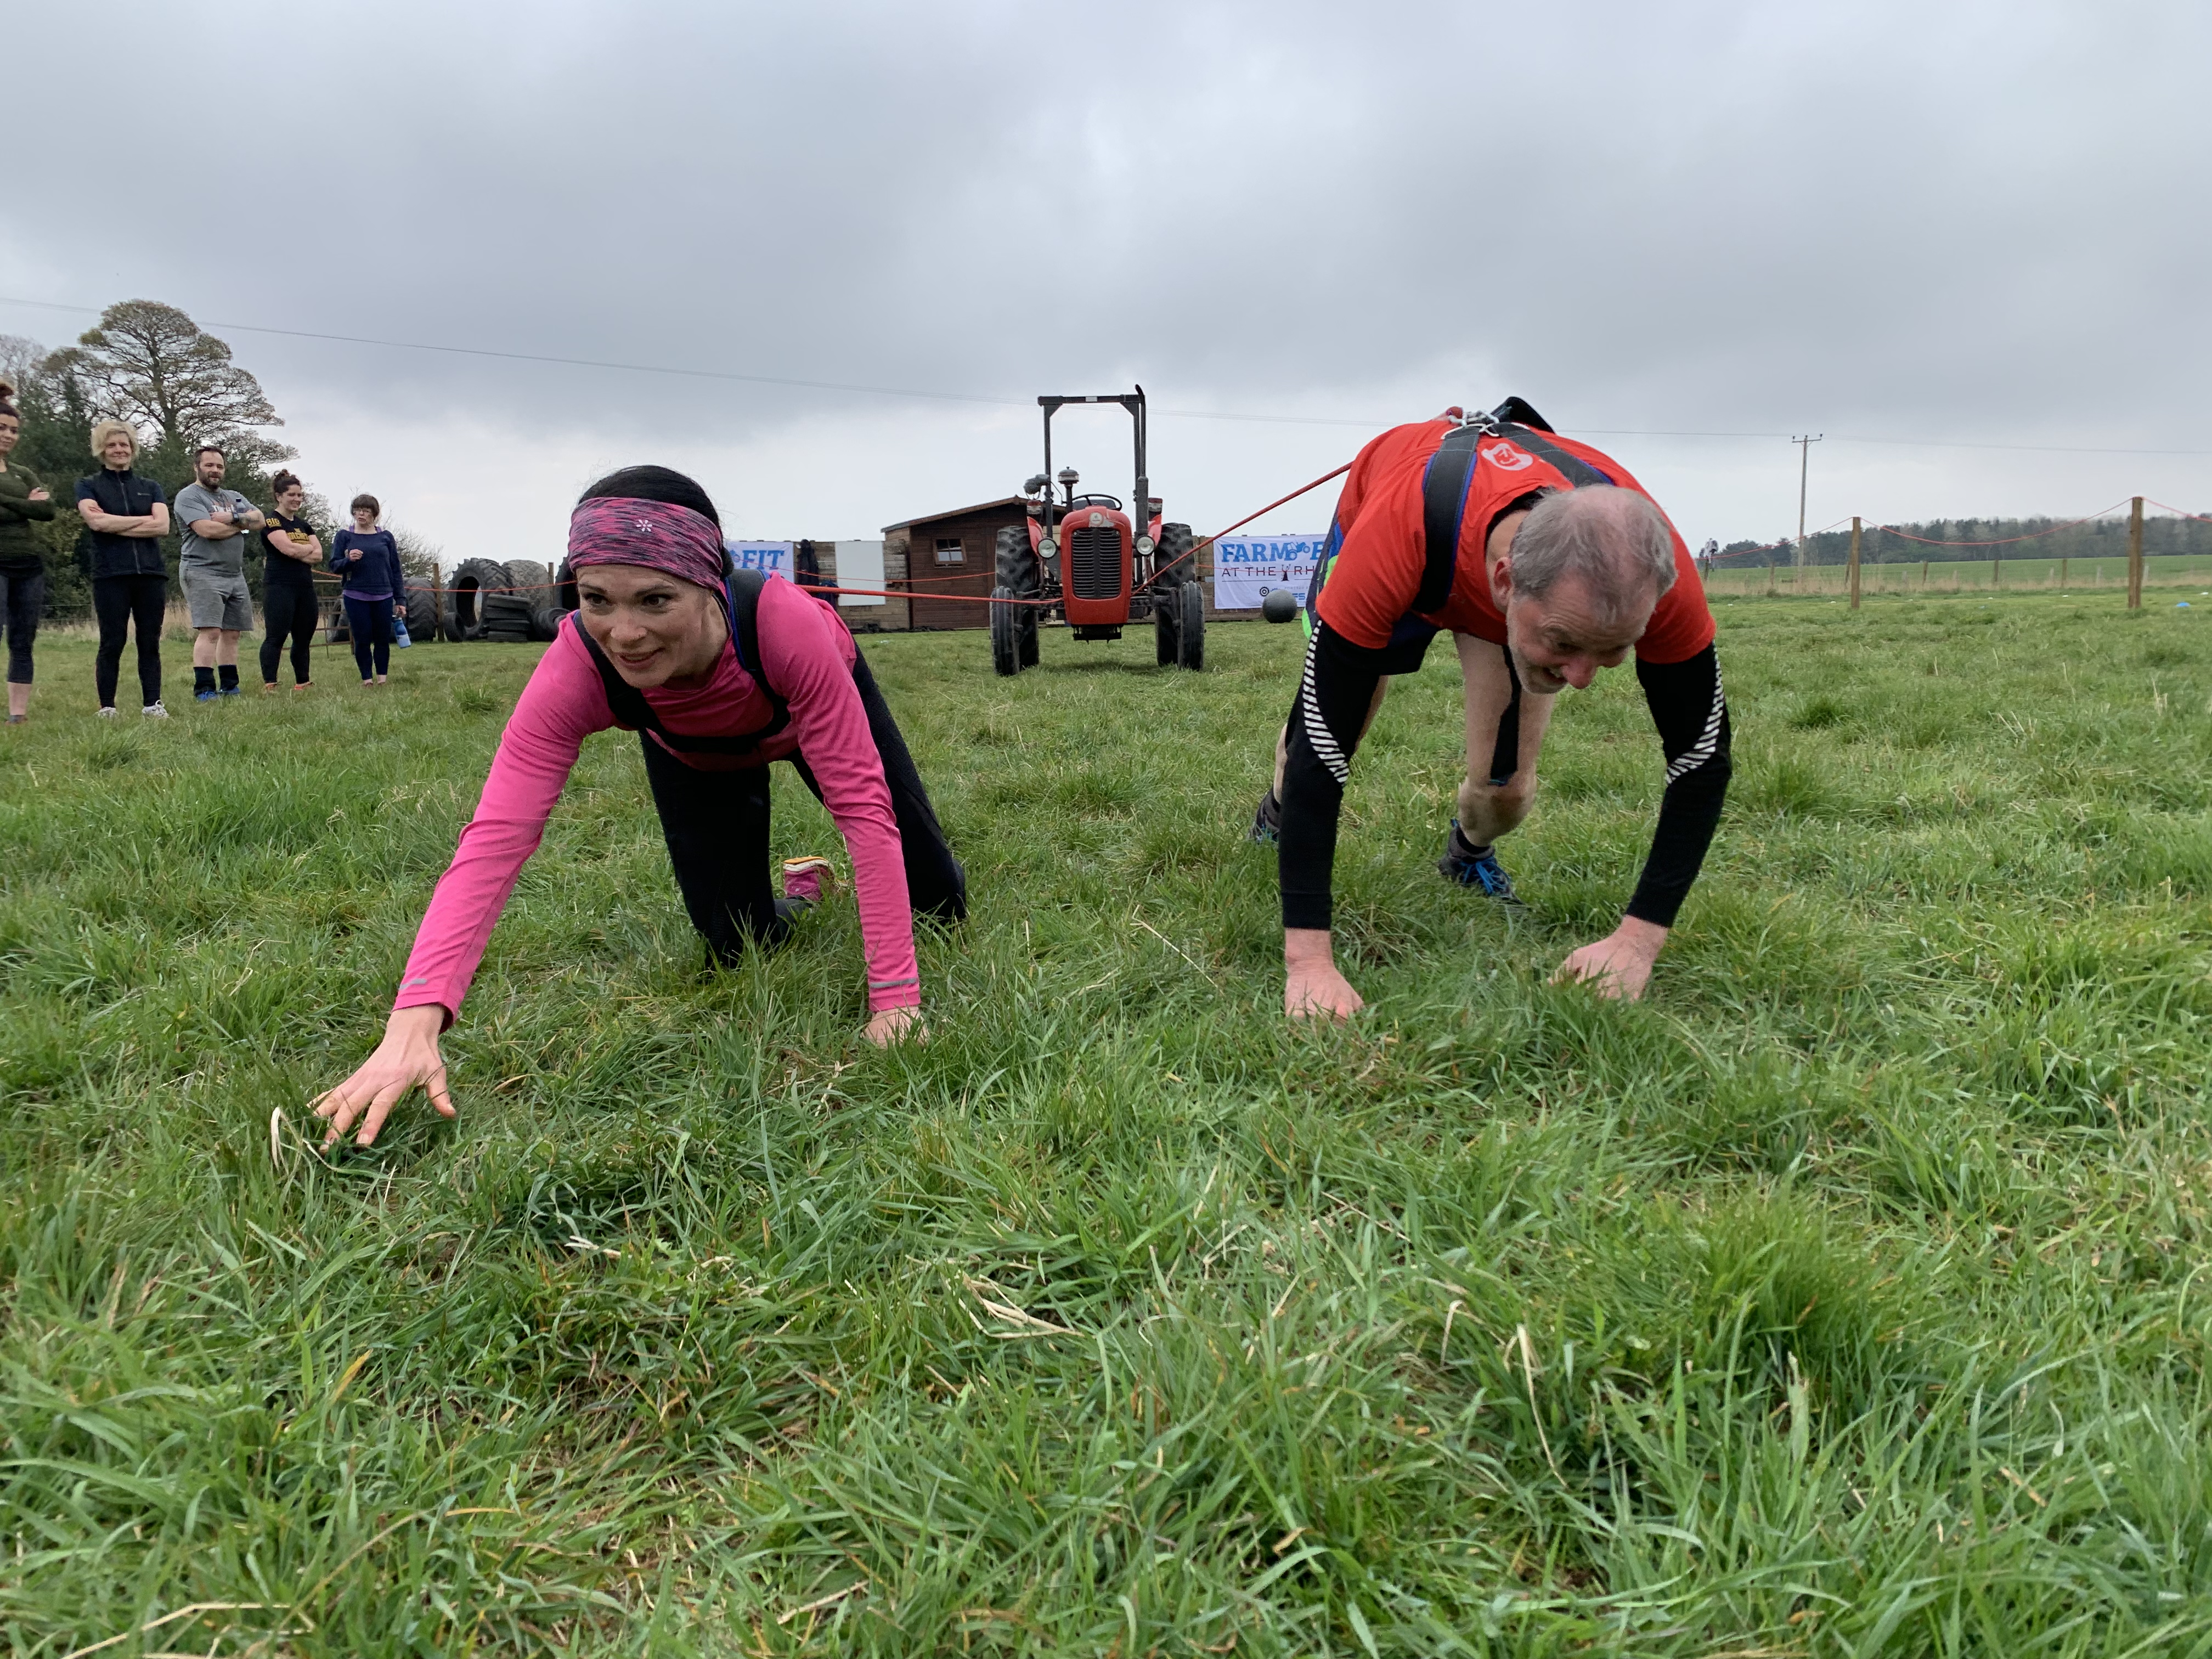 Gayle and Alasdair Chisholm take on the 10-metre tractor pulling challenge at Farming Fit!